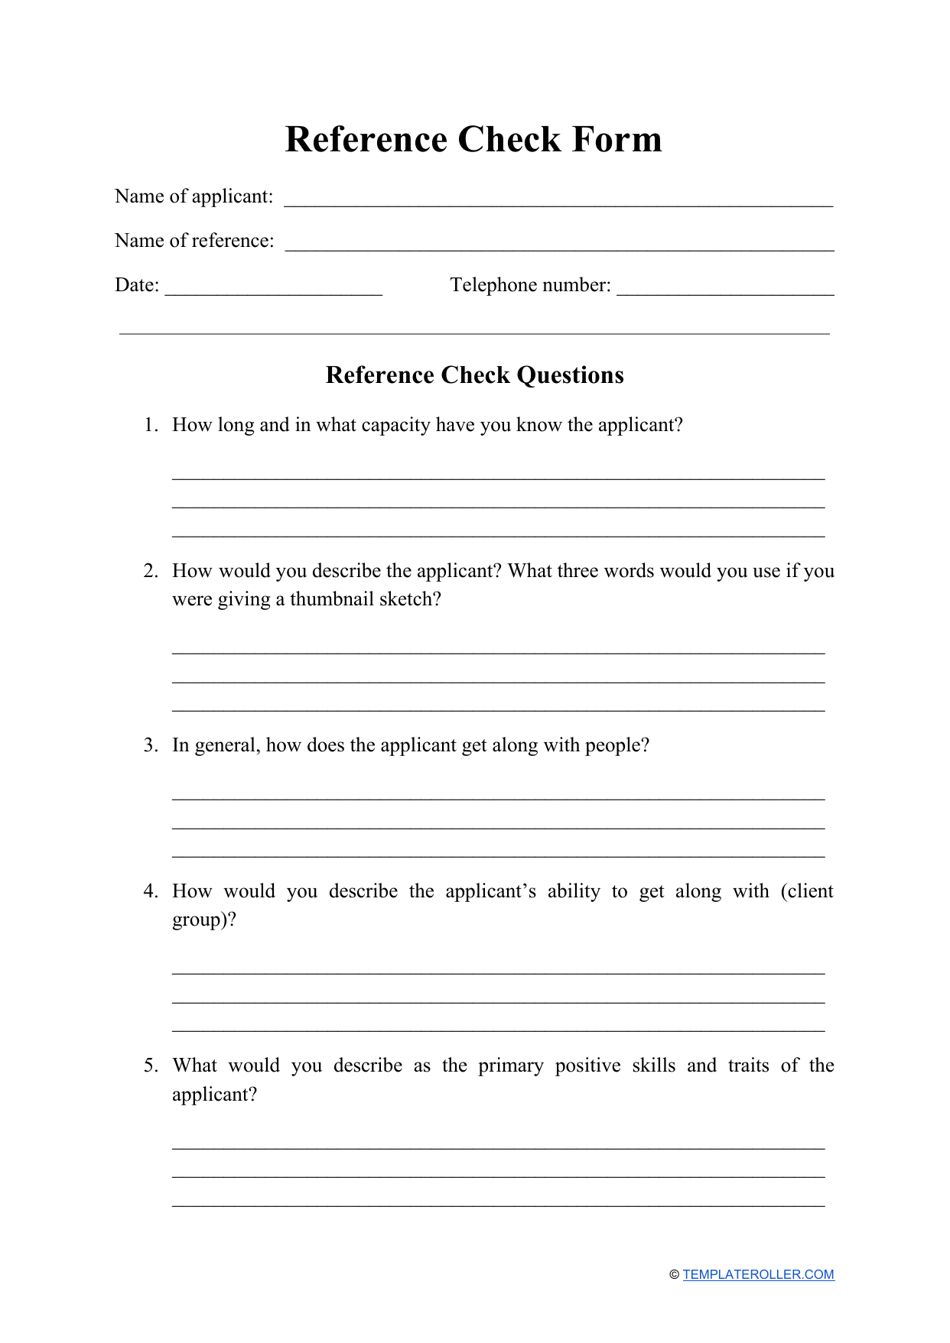 Reference Check Form, Page 1